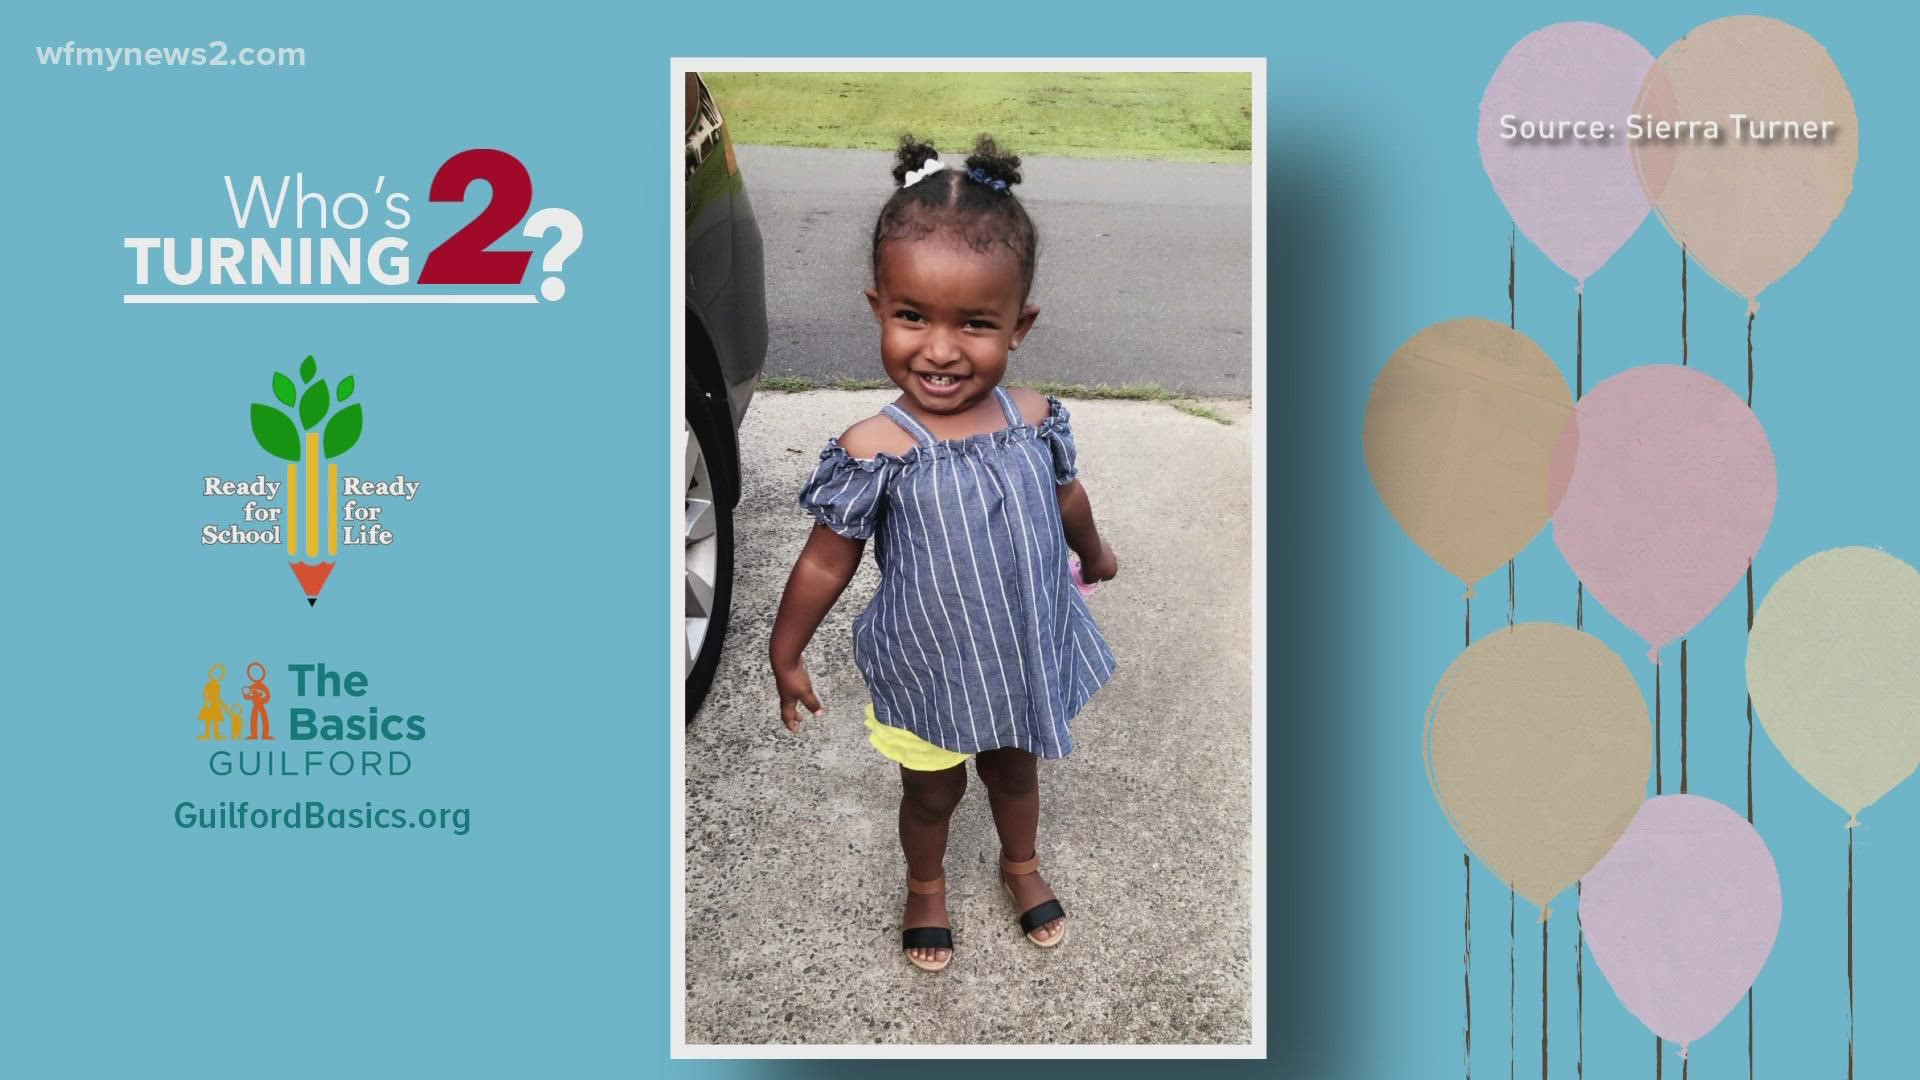 Let’s give some birthday shoutouts to these toddlers turning 2!